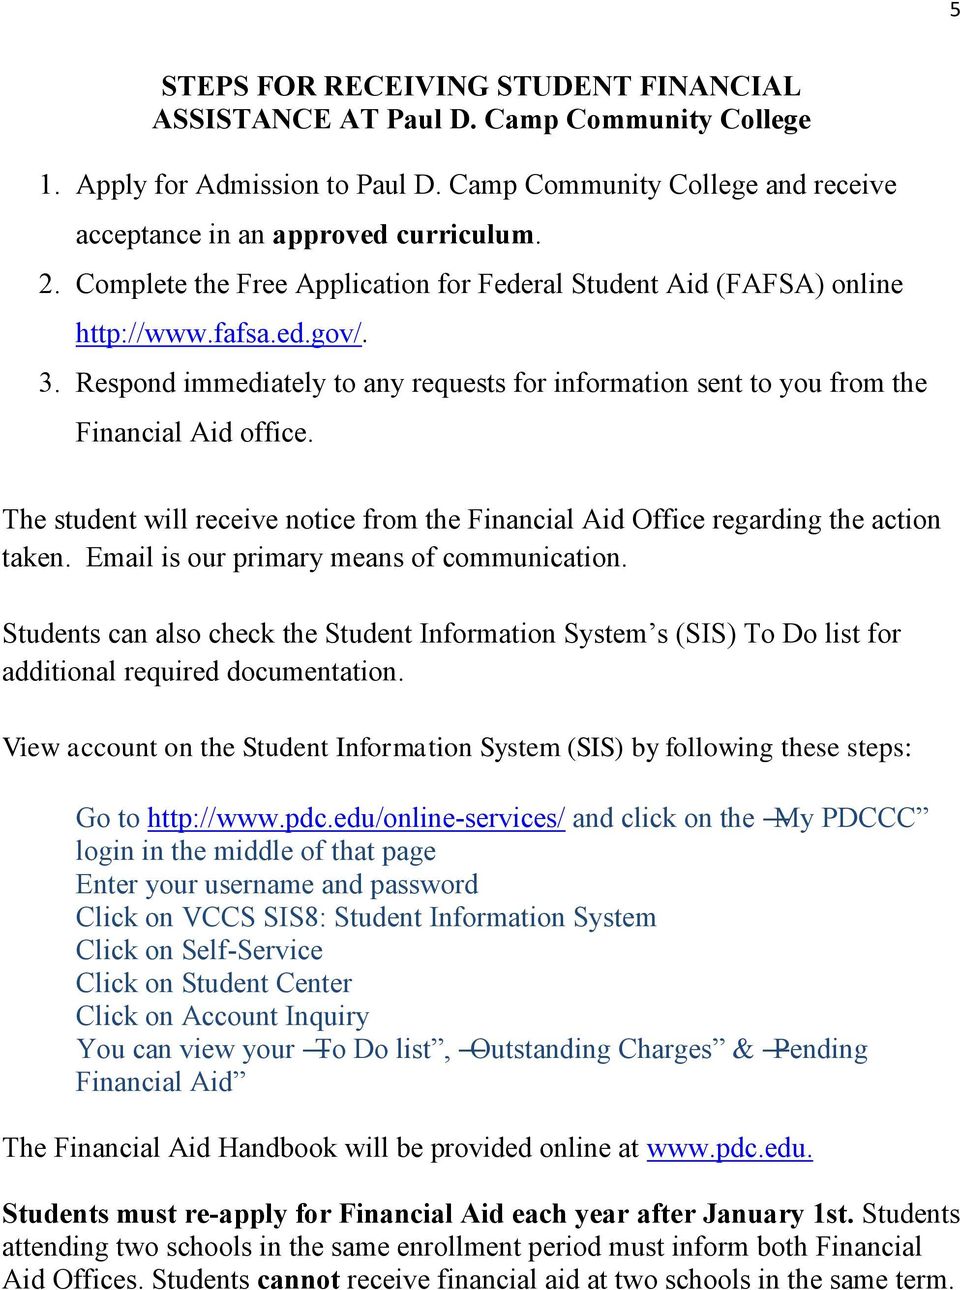 The student will receive notice from the Financial Aid Office regarding the action taken. Email is our primary means of communication.